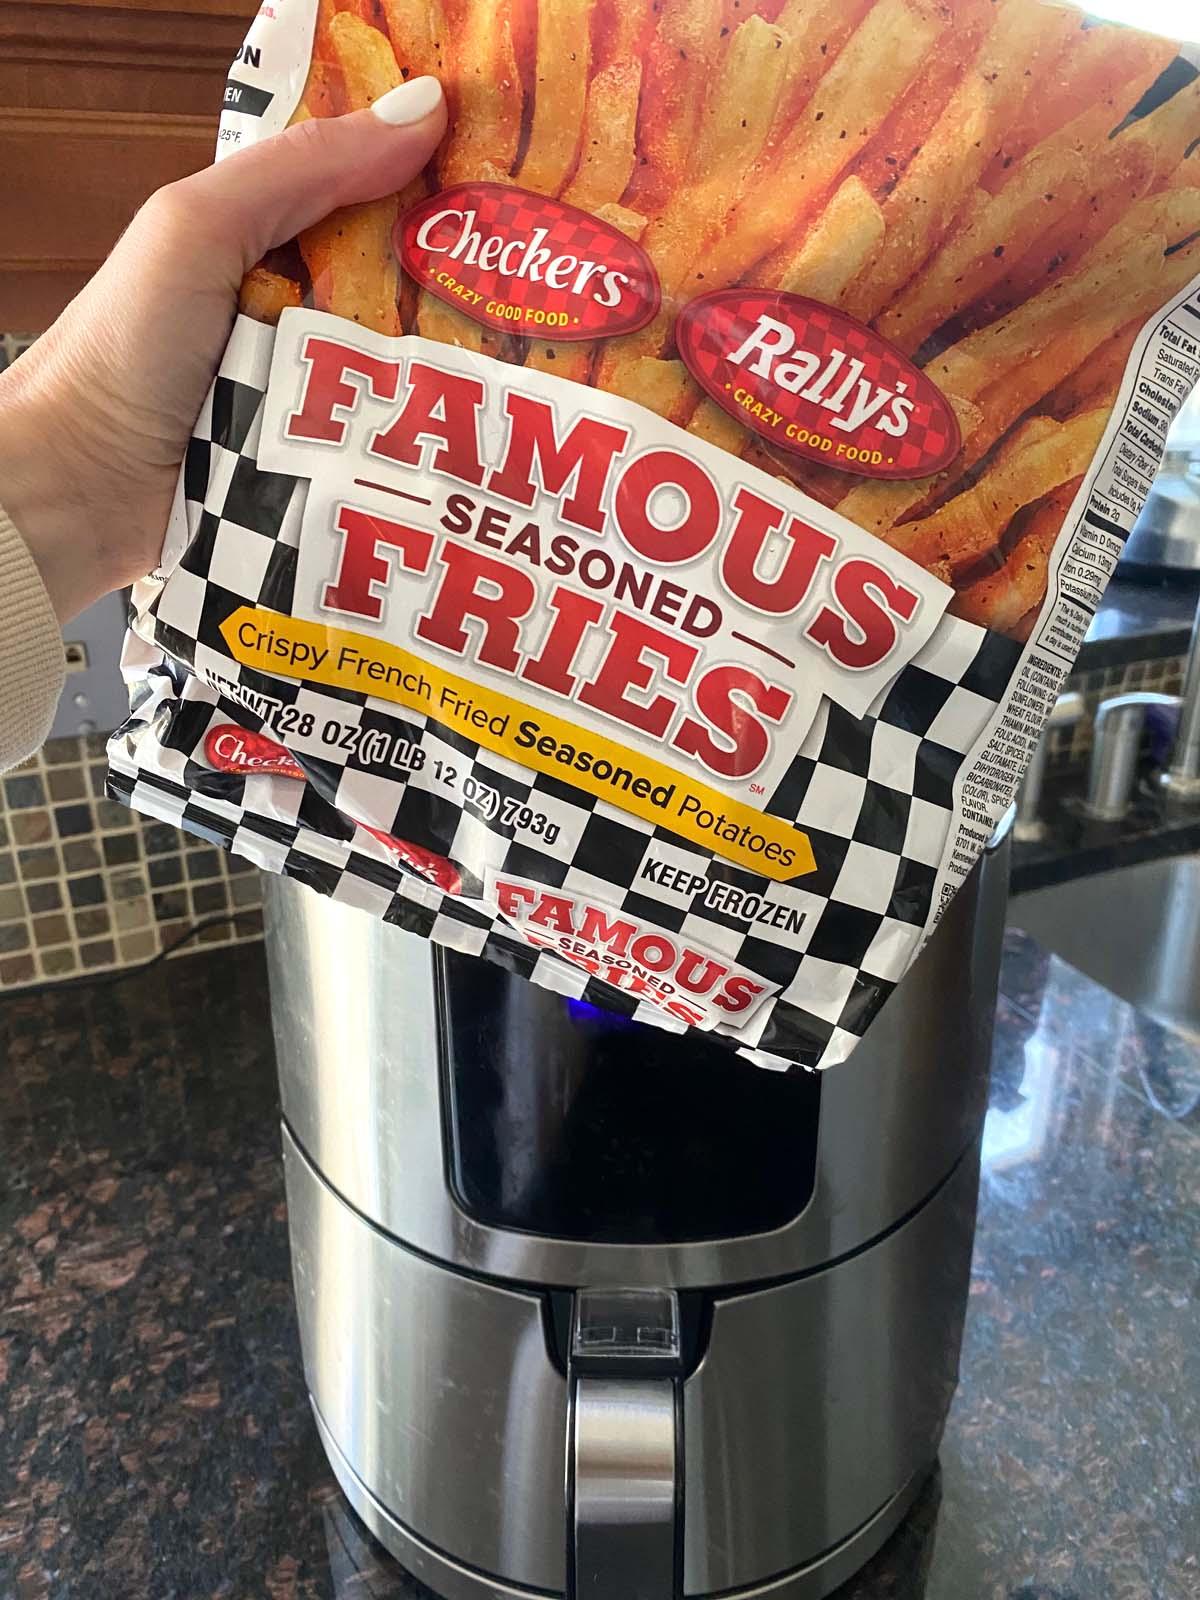 A bag of frozen Checkers famous seasoned fries being held in front of an air fryer.